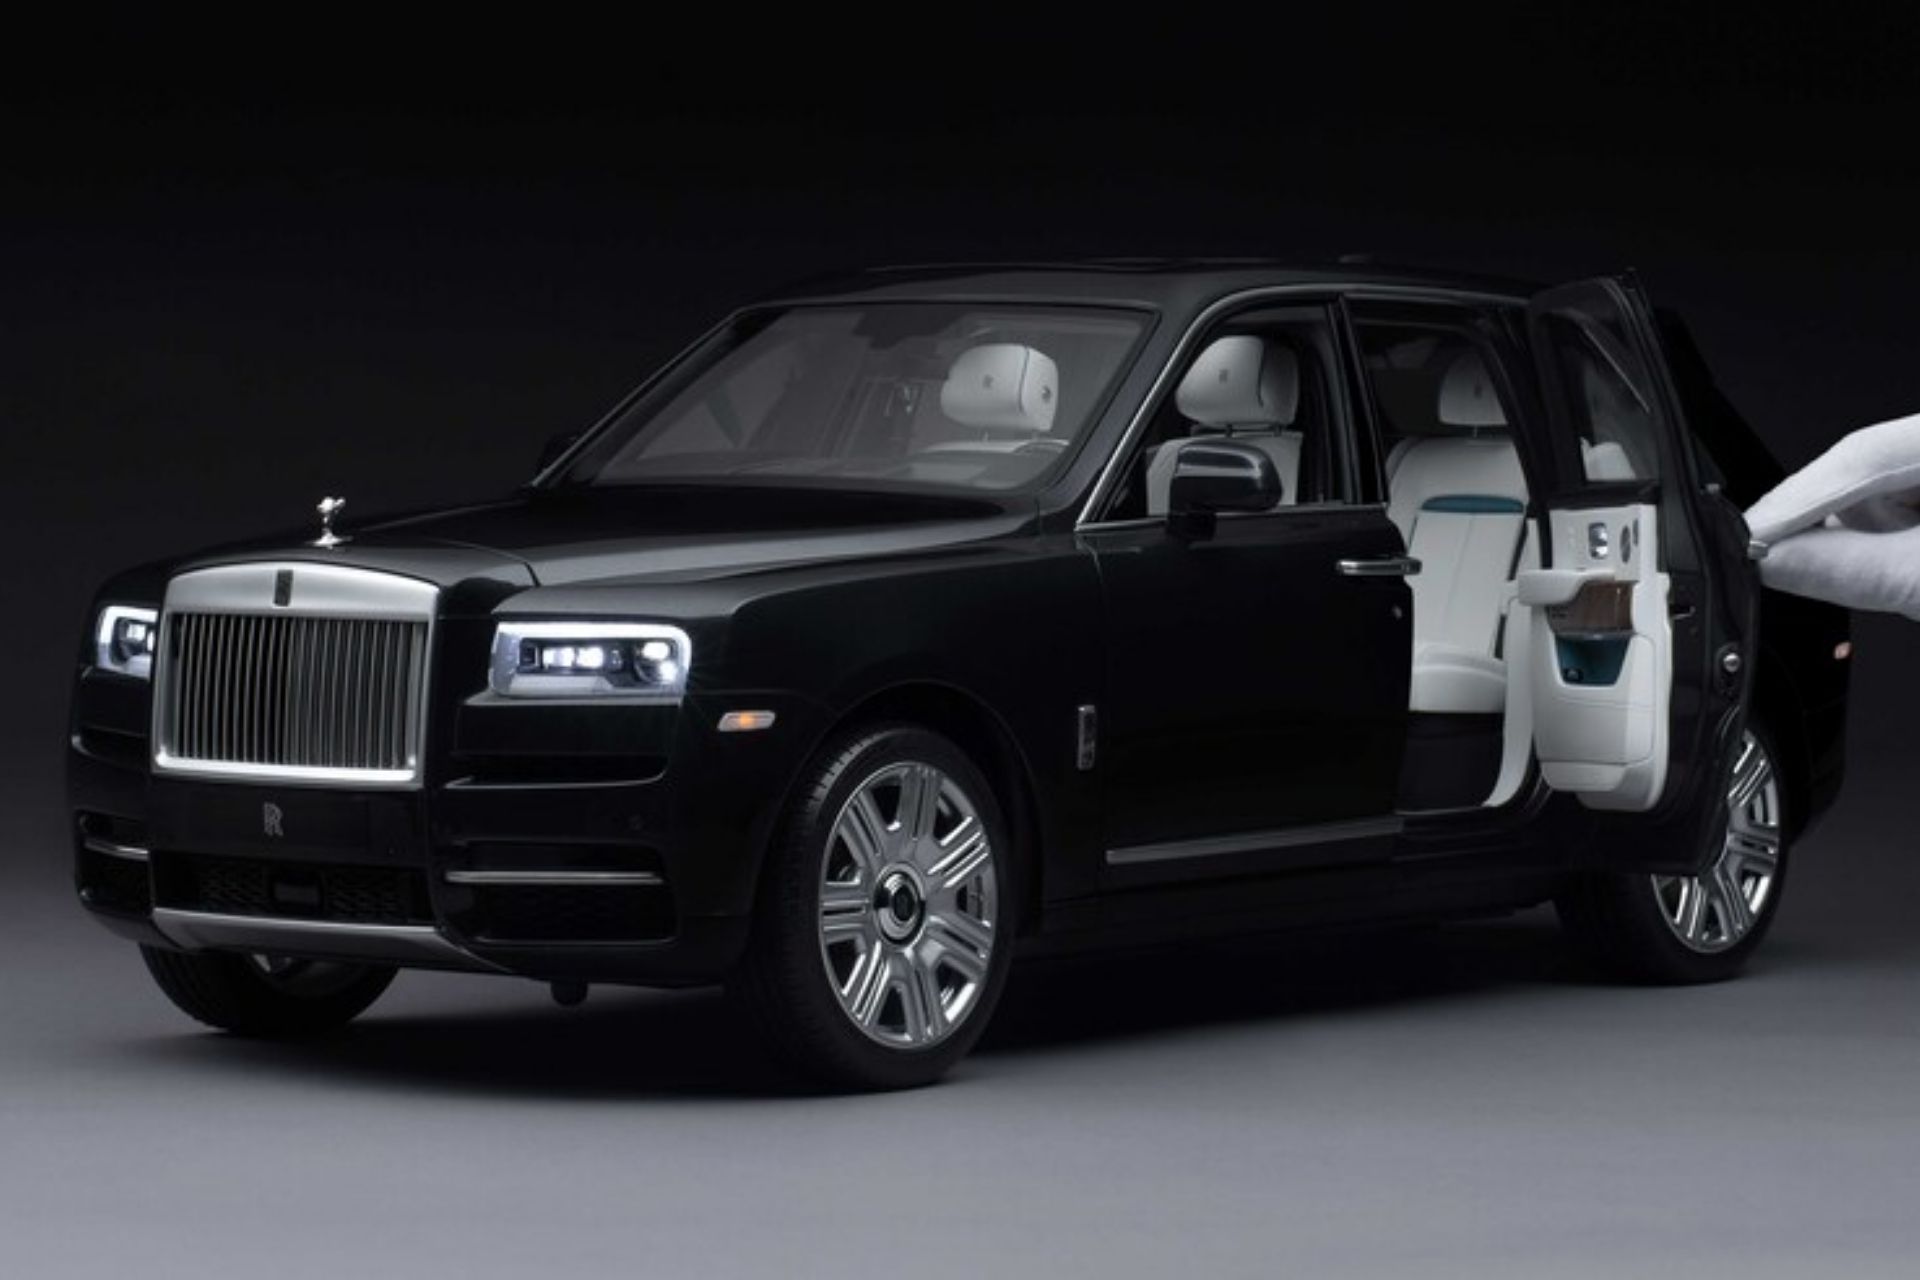 A Toy Cullinan SUV Designed By Rolls-Royce Just Sold For $26k - GQ